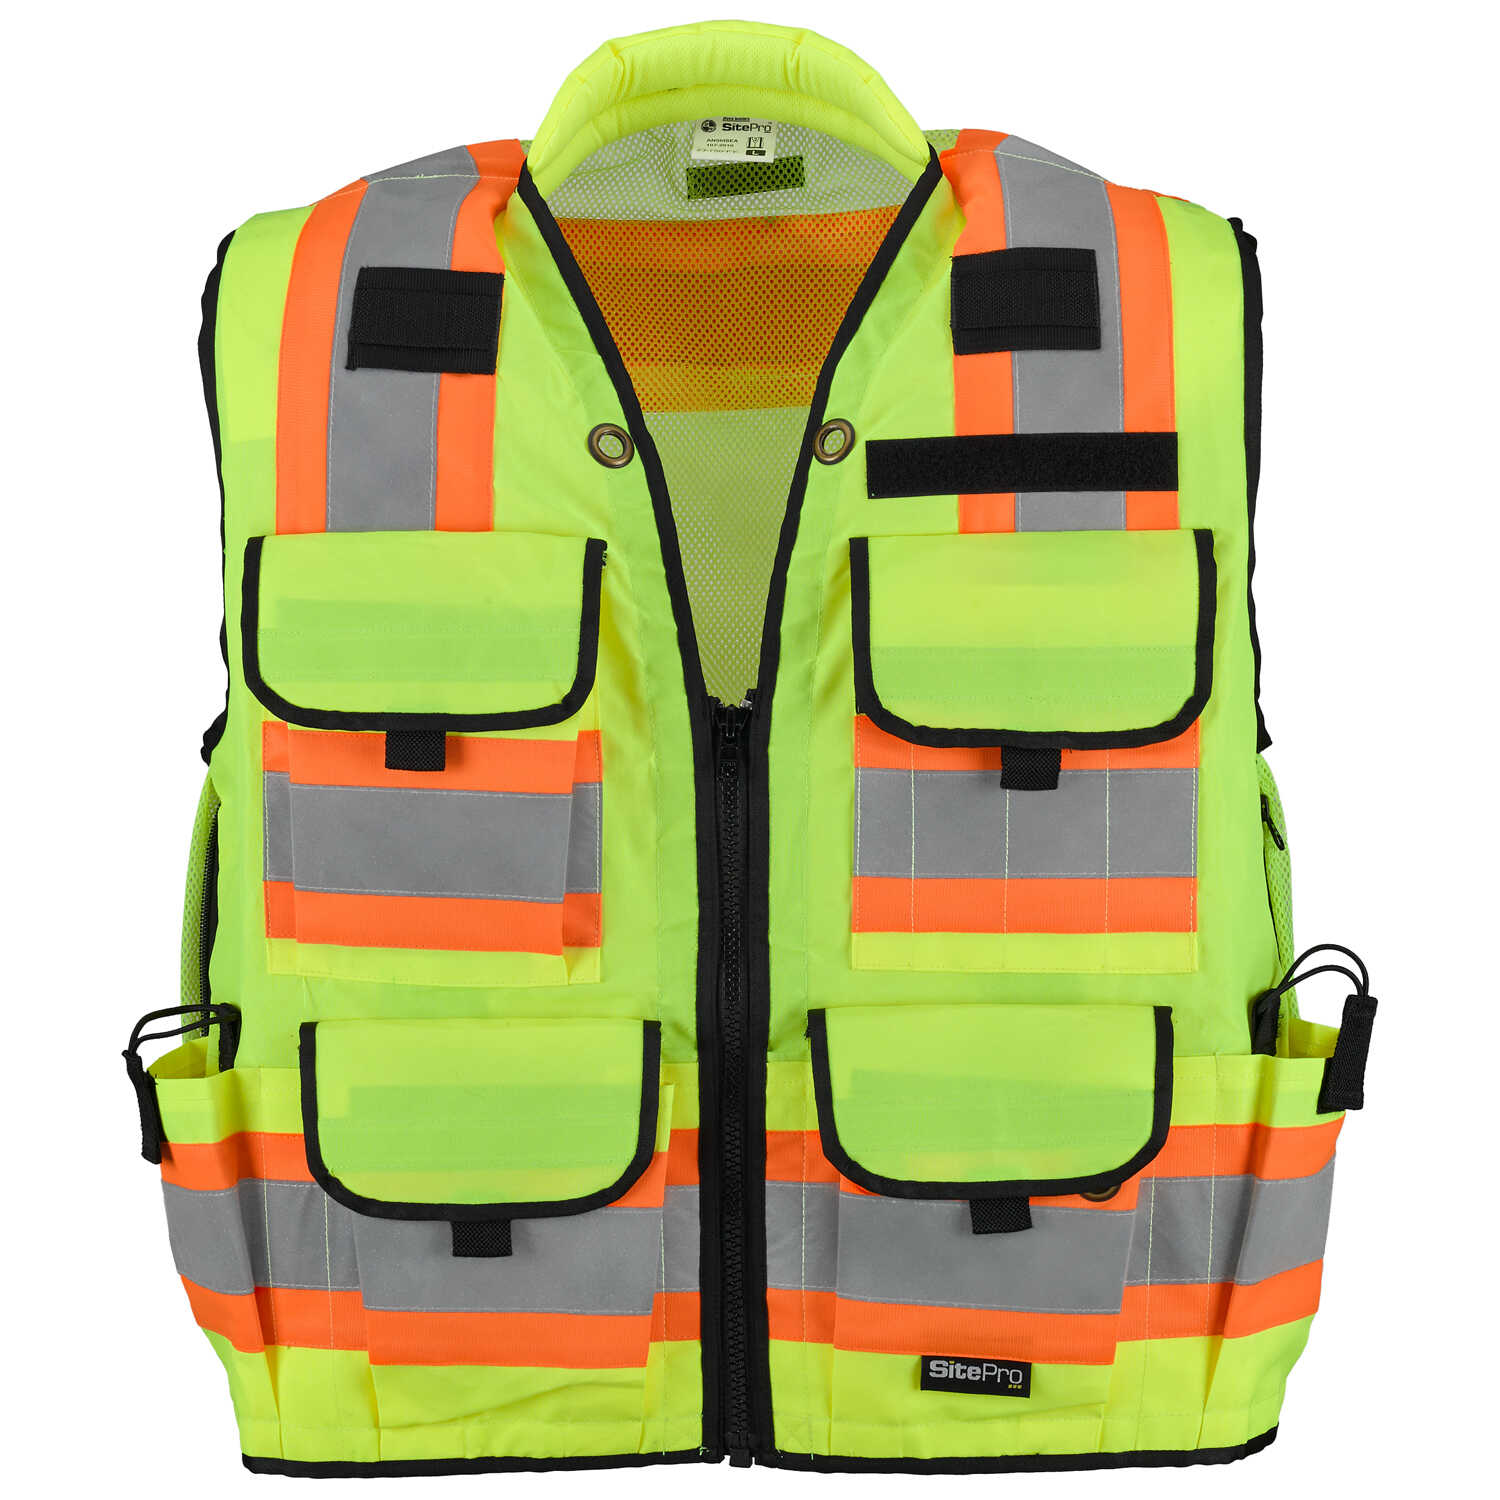 SitePro 750 Class Premium Surveyor's Safety Vest, Small Forestry  Suppliers, Inc.